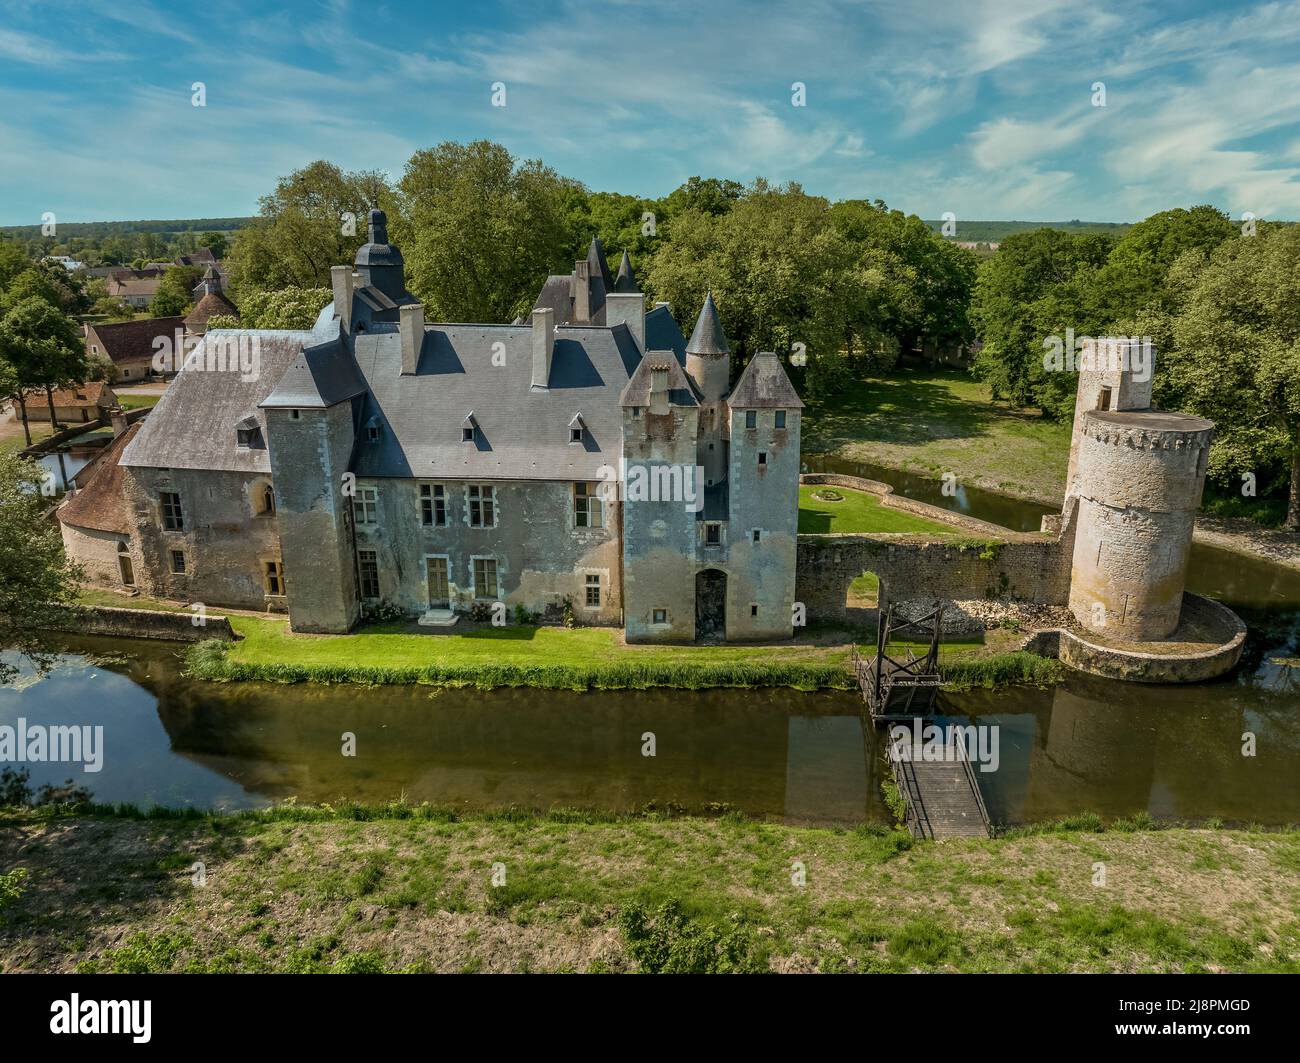 Aerial view of historic monument Bannegon castle in France on the border between Berry and Bourbonnais, with imposing keep, drawbridge, and a trapezoi Stock Photo